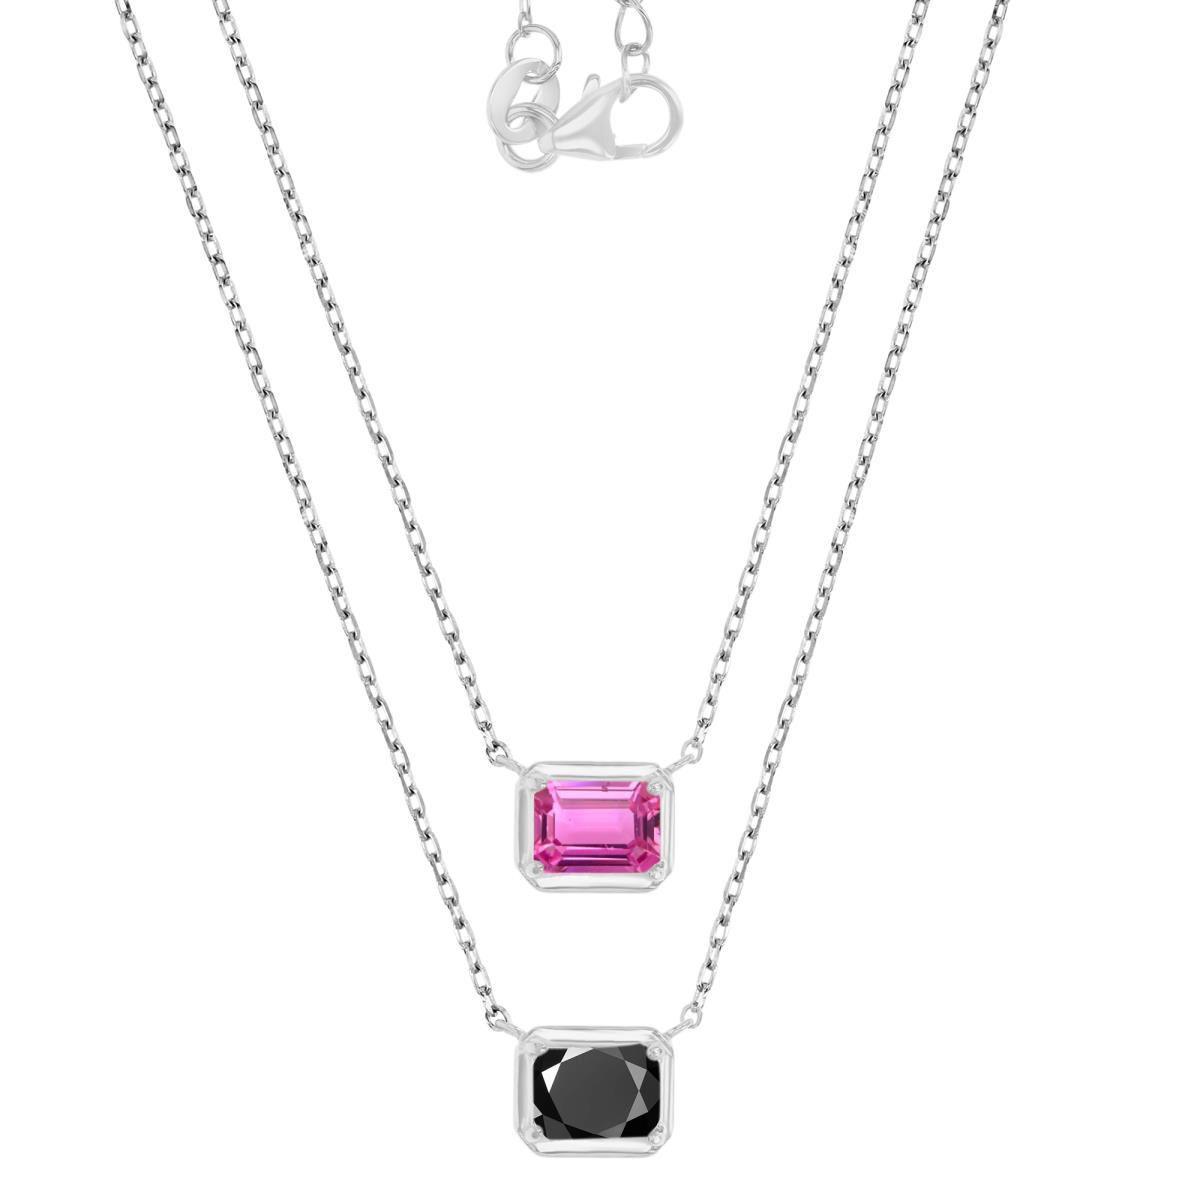 Sterling Silver Rhodium 9X7MM Polished Created Pink Sapphire & Black Spinel Emerald Cut 16+2" Necklaces Set